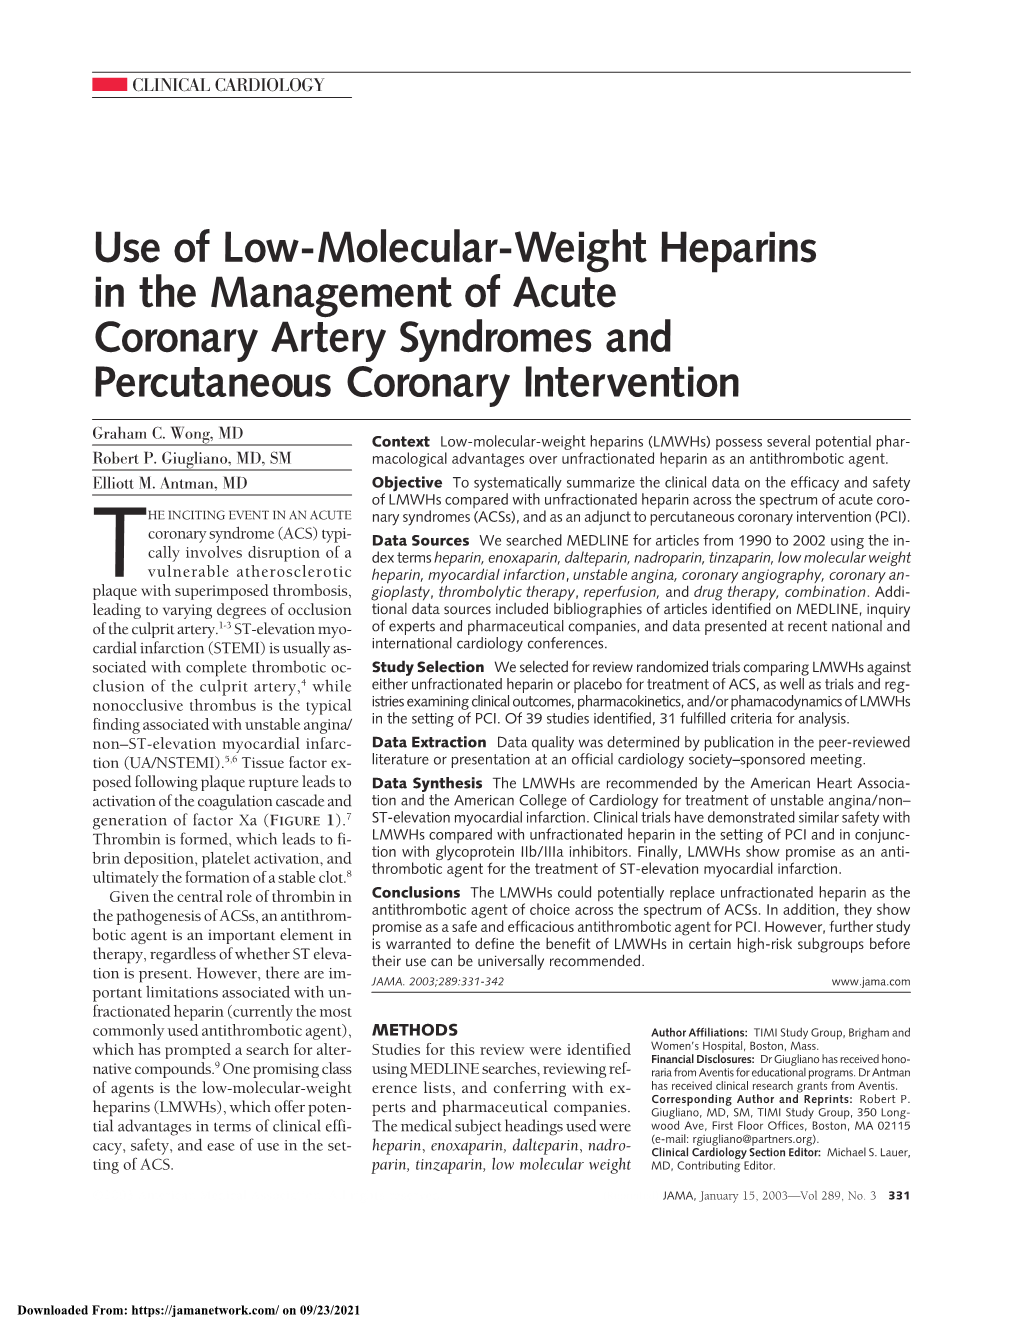 Use of Low-Molecular-Weight Heparins in the Management of Acute Coronary Artery Syndromes and Percutaneous Coronary Intervention